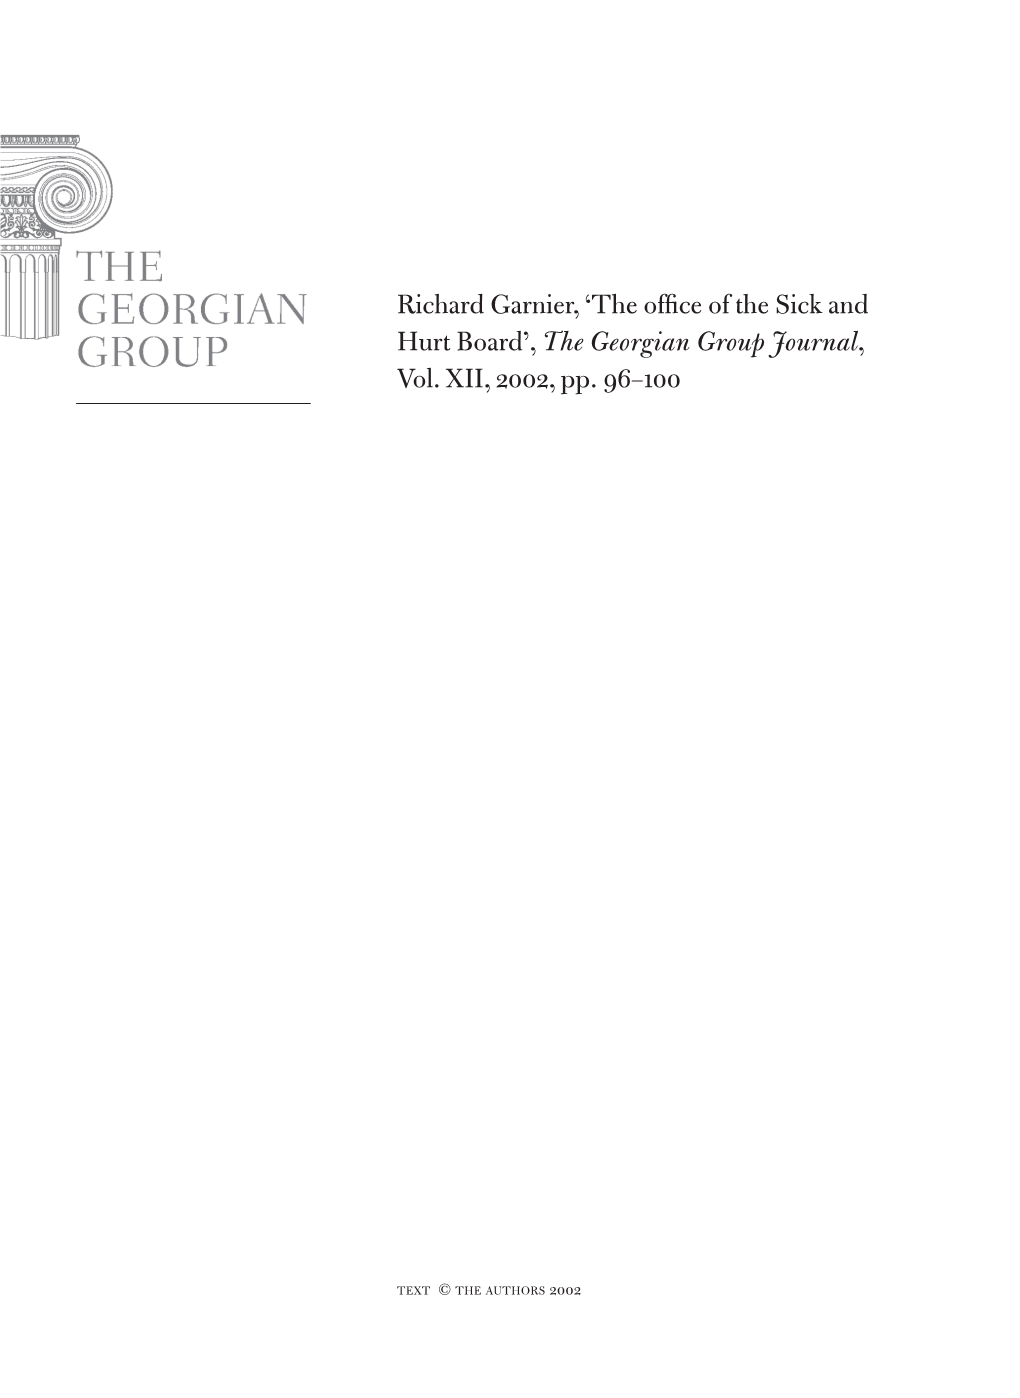 The Office of the Sick and Hurt Board’, the Georgian Group Journal, Vol